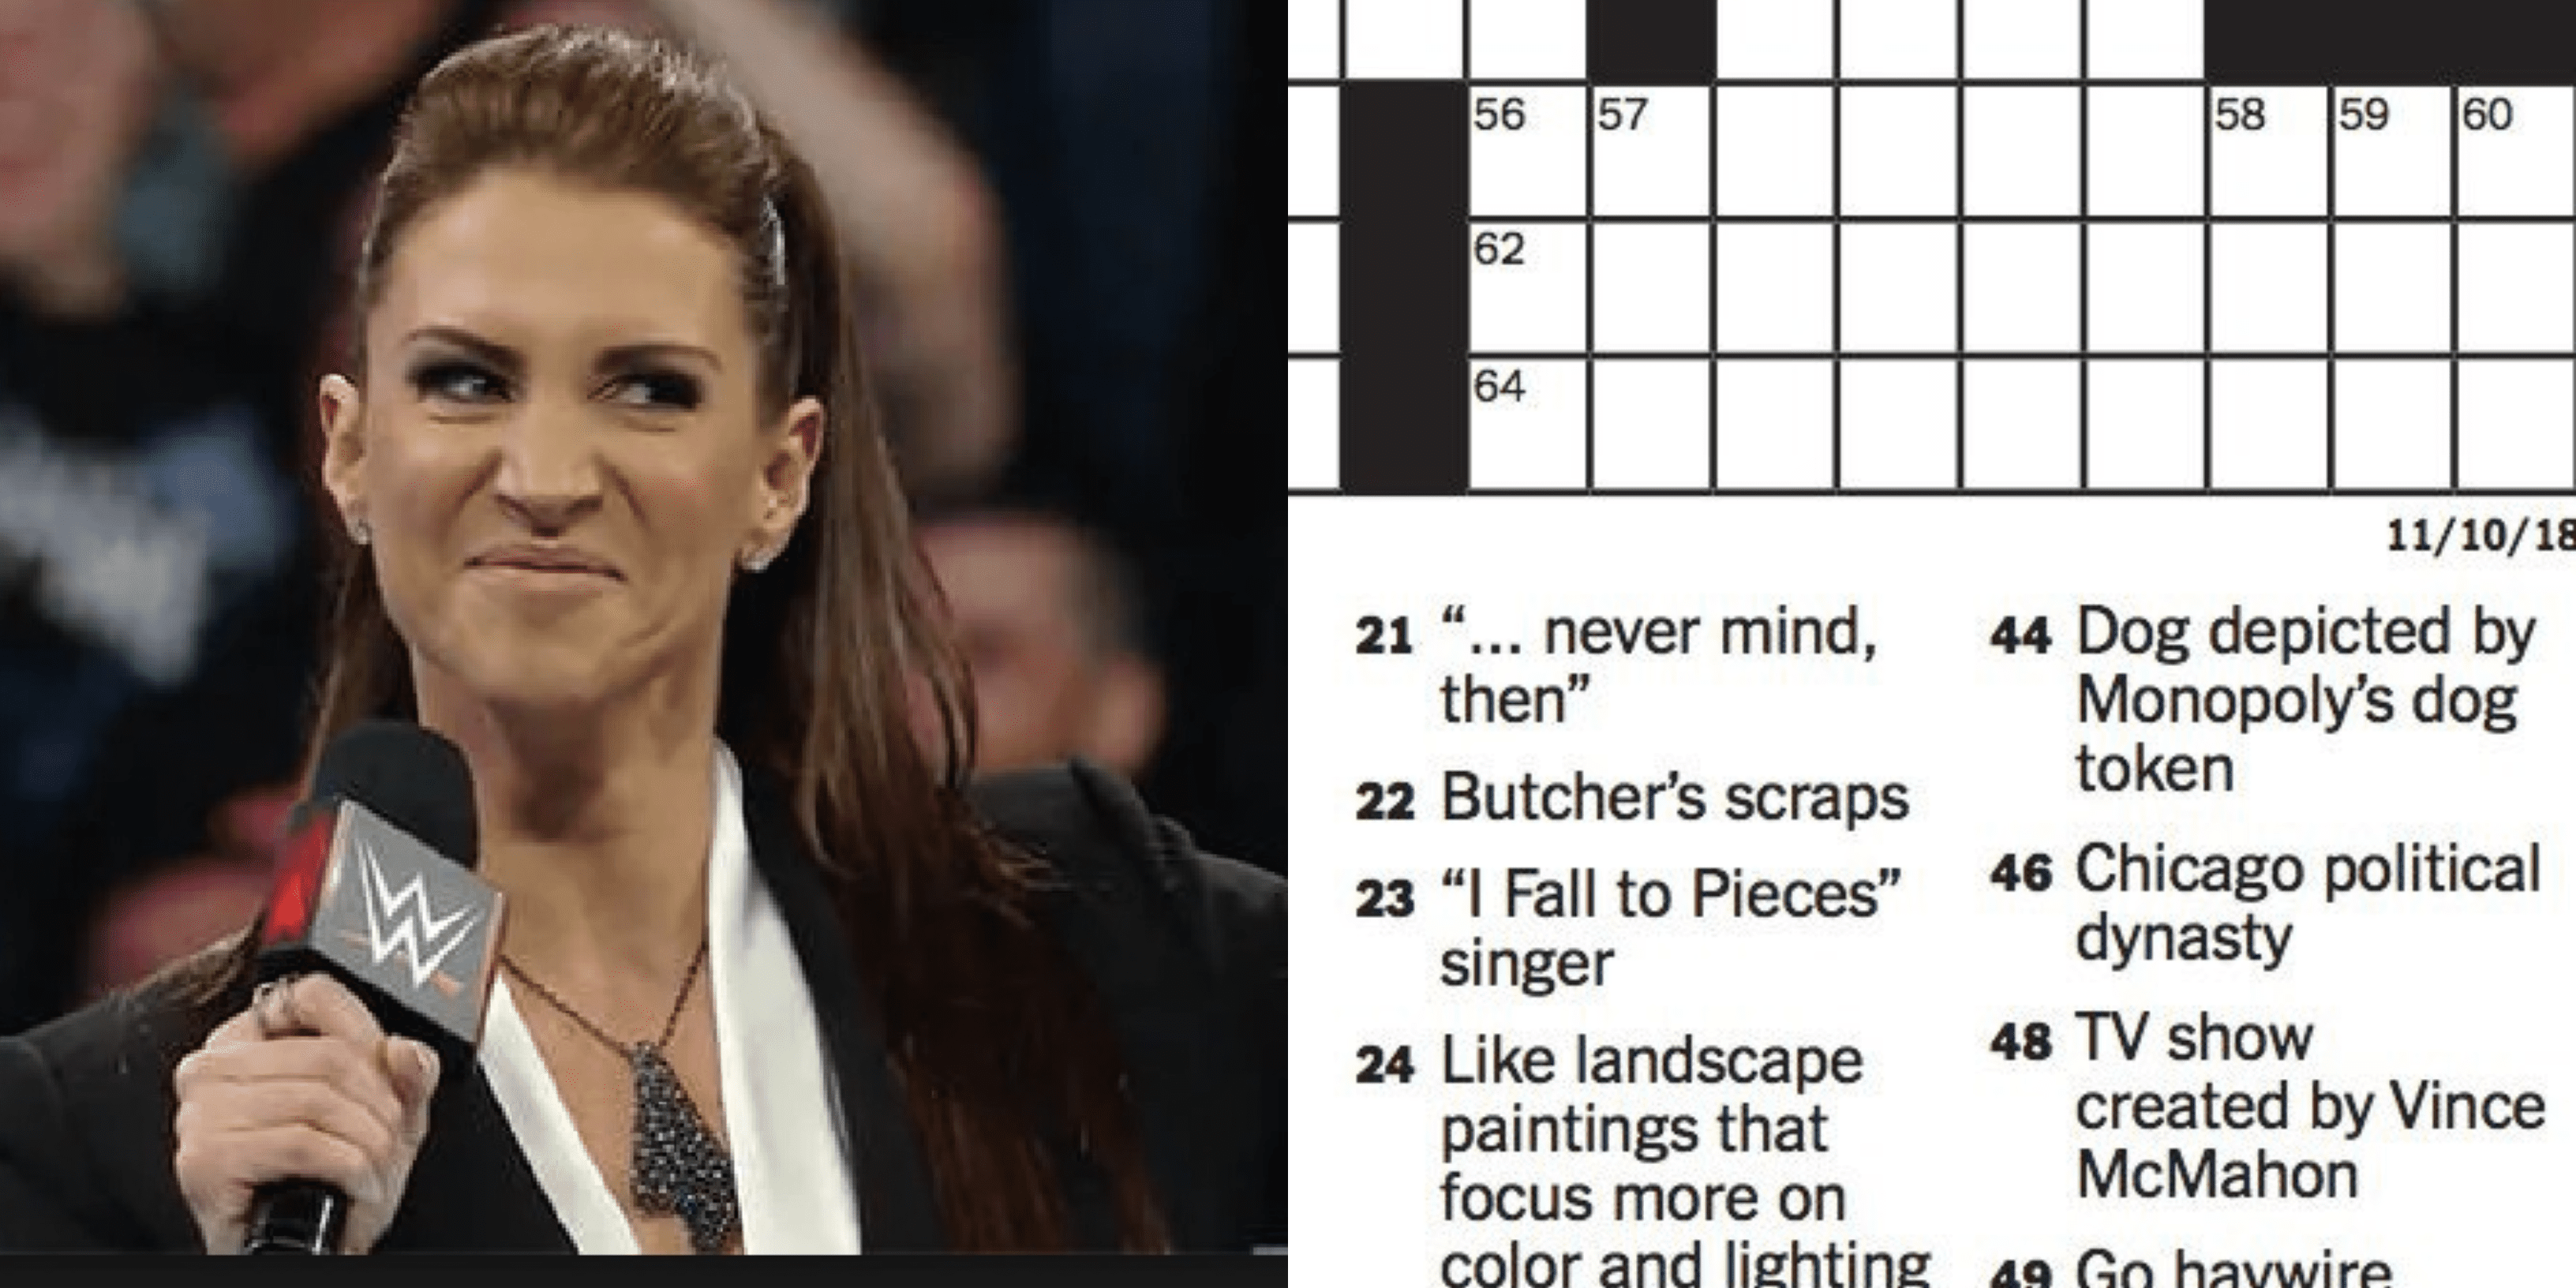 Stephanie McMahon Says WWE Has “Finally Arrived” After Mention In New York Times Crossword Puzzle